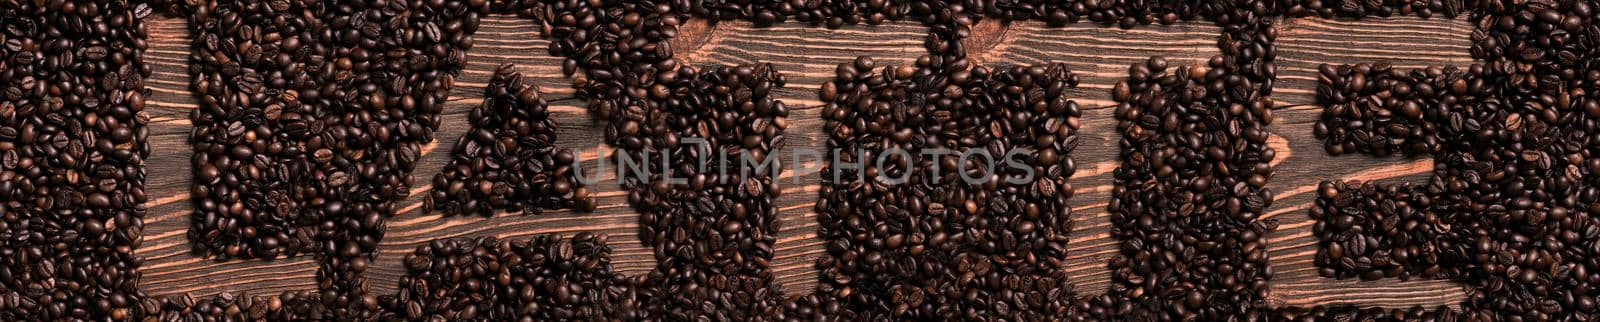 Latte word written with wooden letters on coffee beans heap. Top view